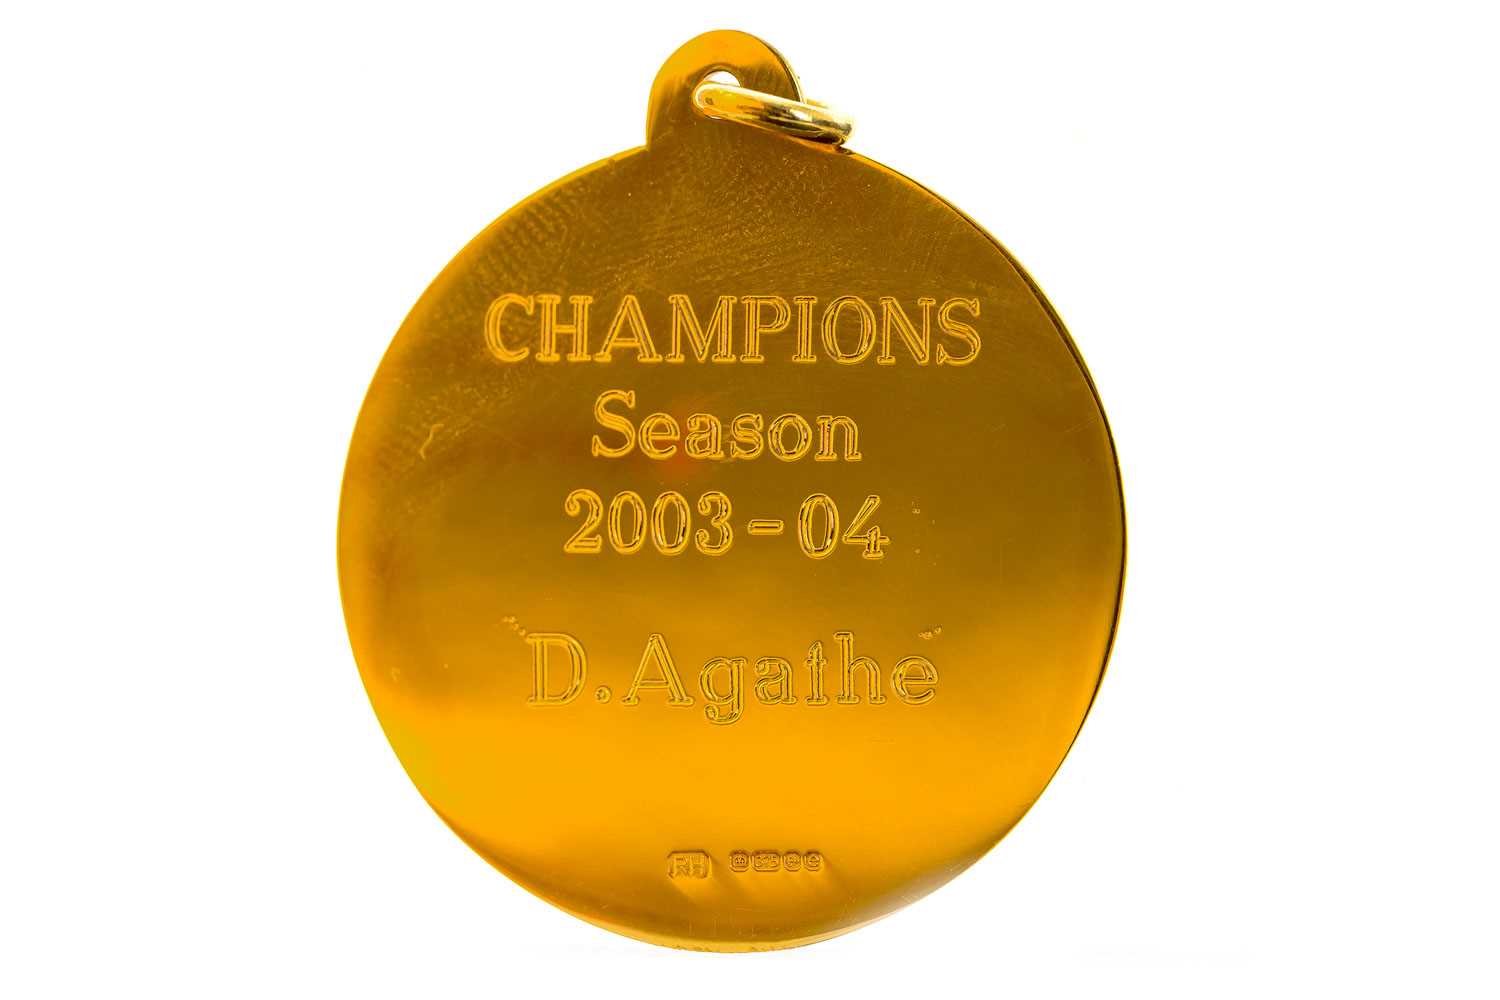 DIDIER AGATHE OF CELTIC F.C., SPL CHAMPIONS WINNERS GOLD MEDAL, 2003/04 - Image 2 of 2